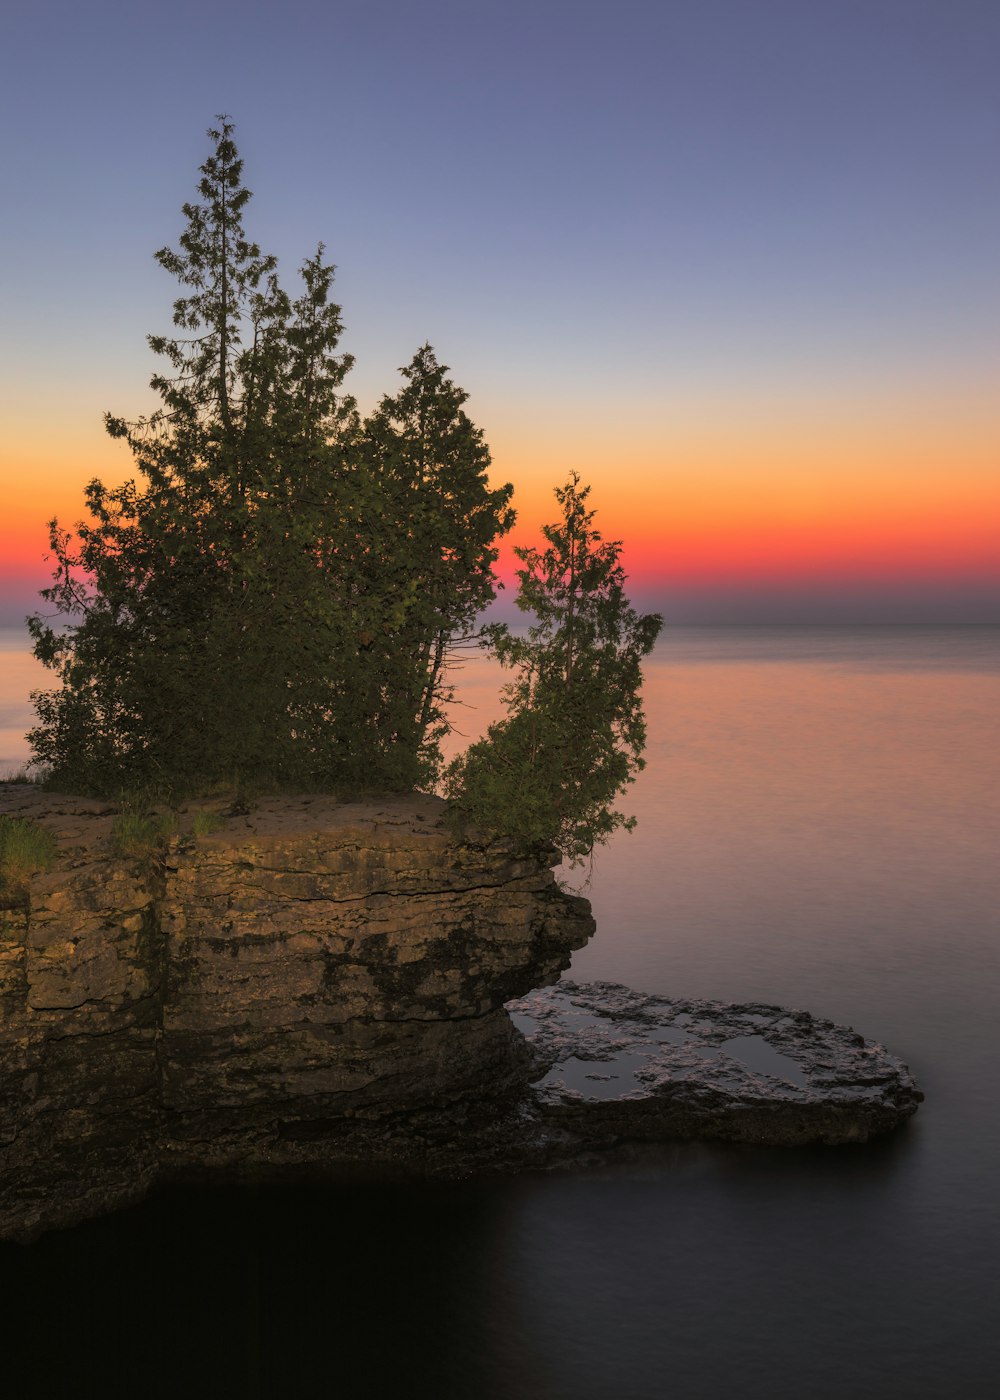 green tree on rock formation near body of water during sunset